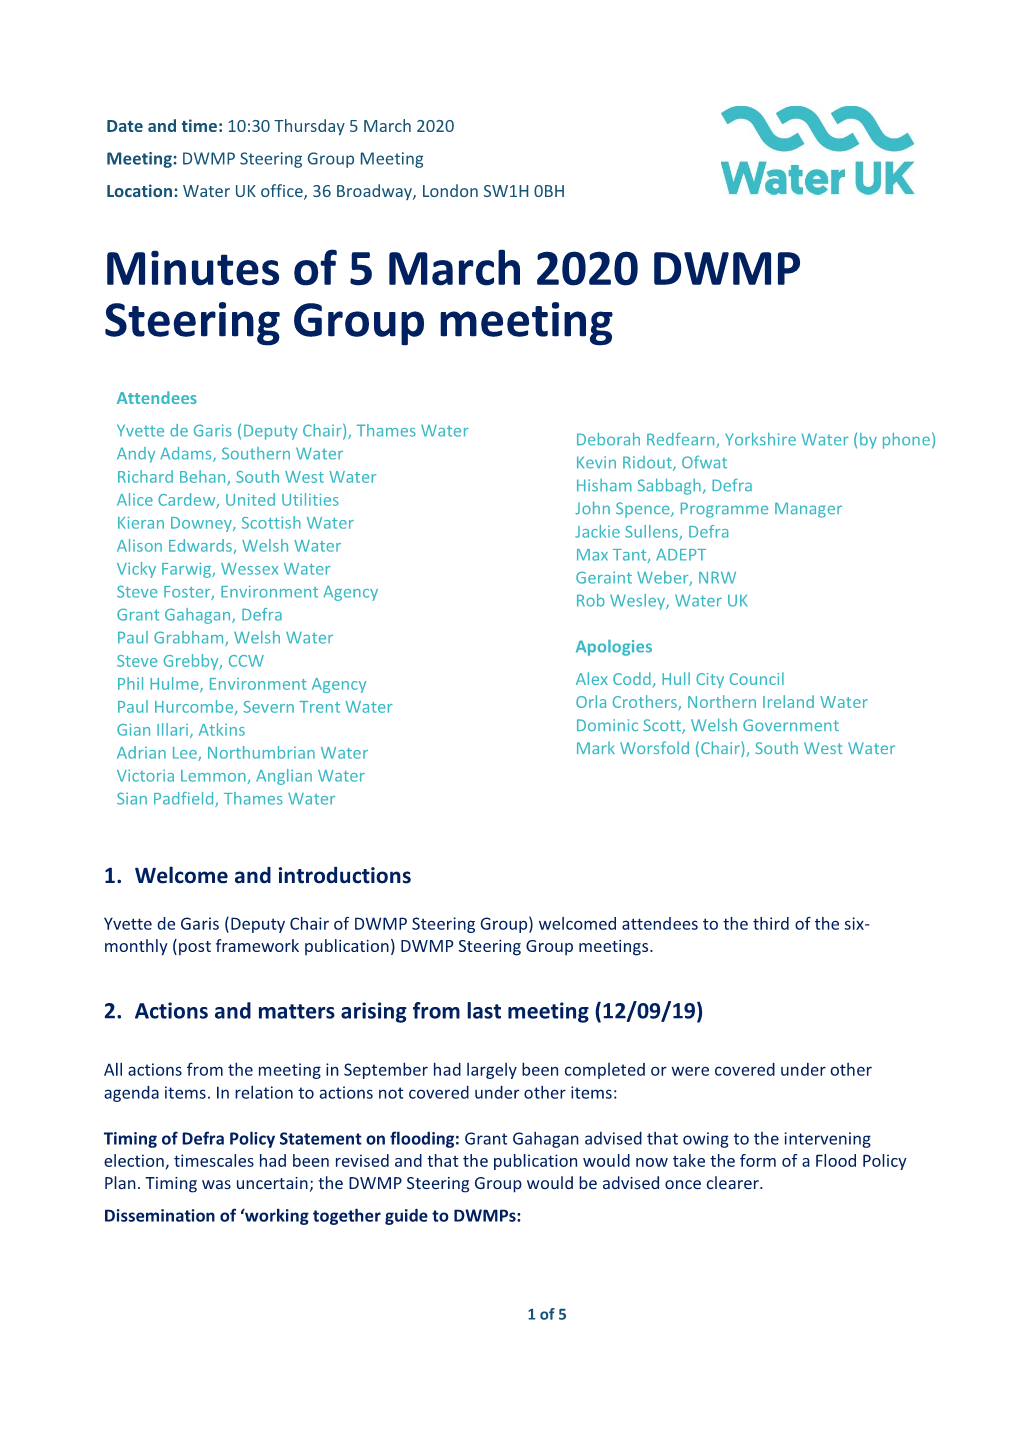 DWMP Steering Group – Minutes of 5 March 2020 Meeting